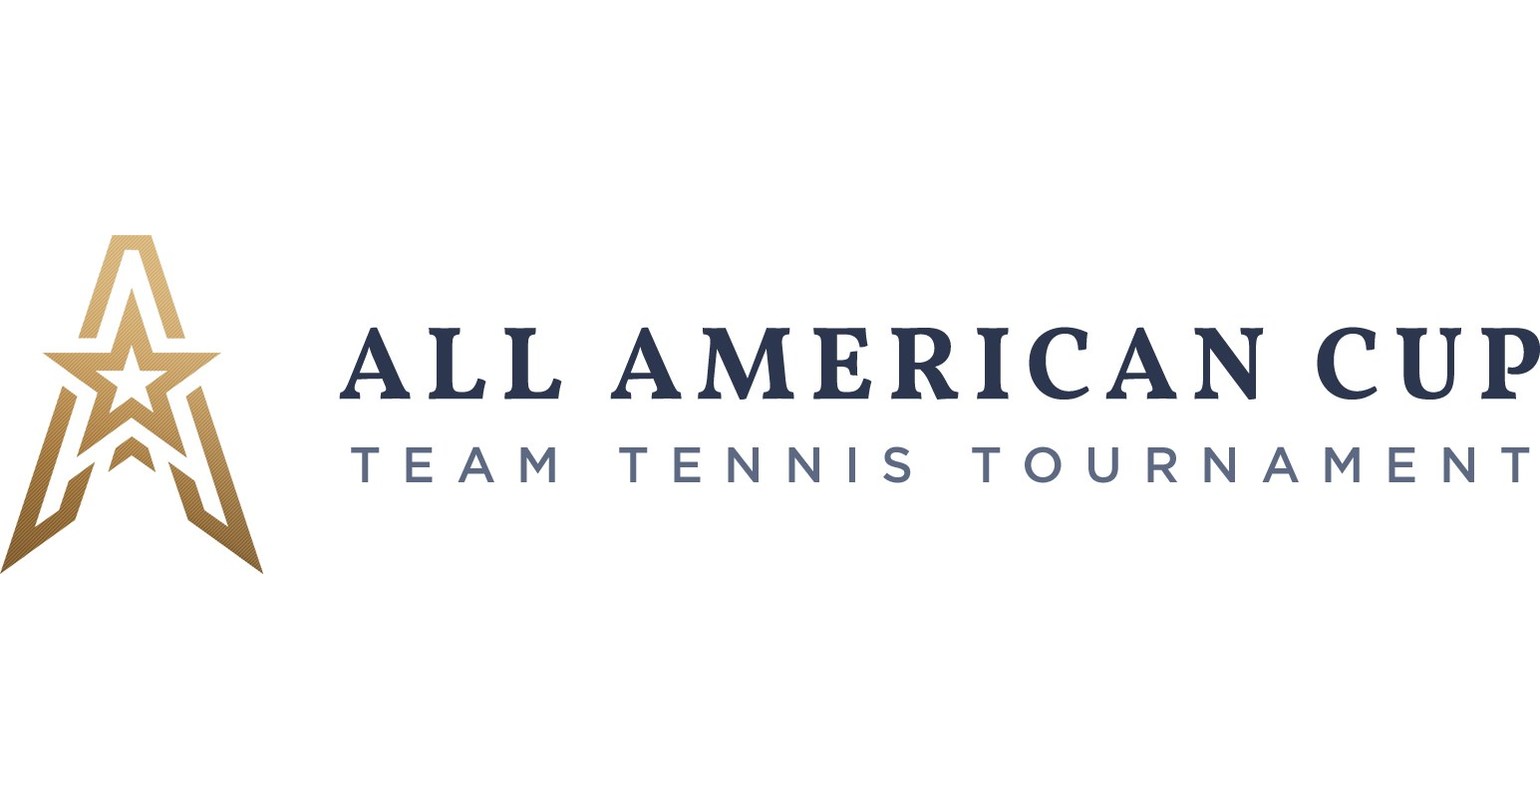 INAUGURAL THOMAS J HENRY ALL AMERICAN CUP TO SERVE UP WORLD CLASS